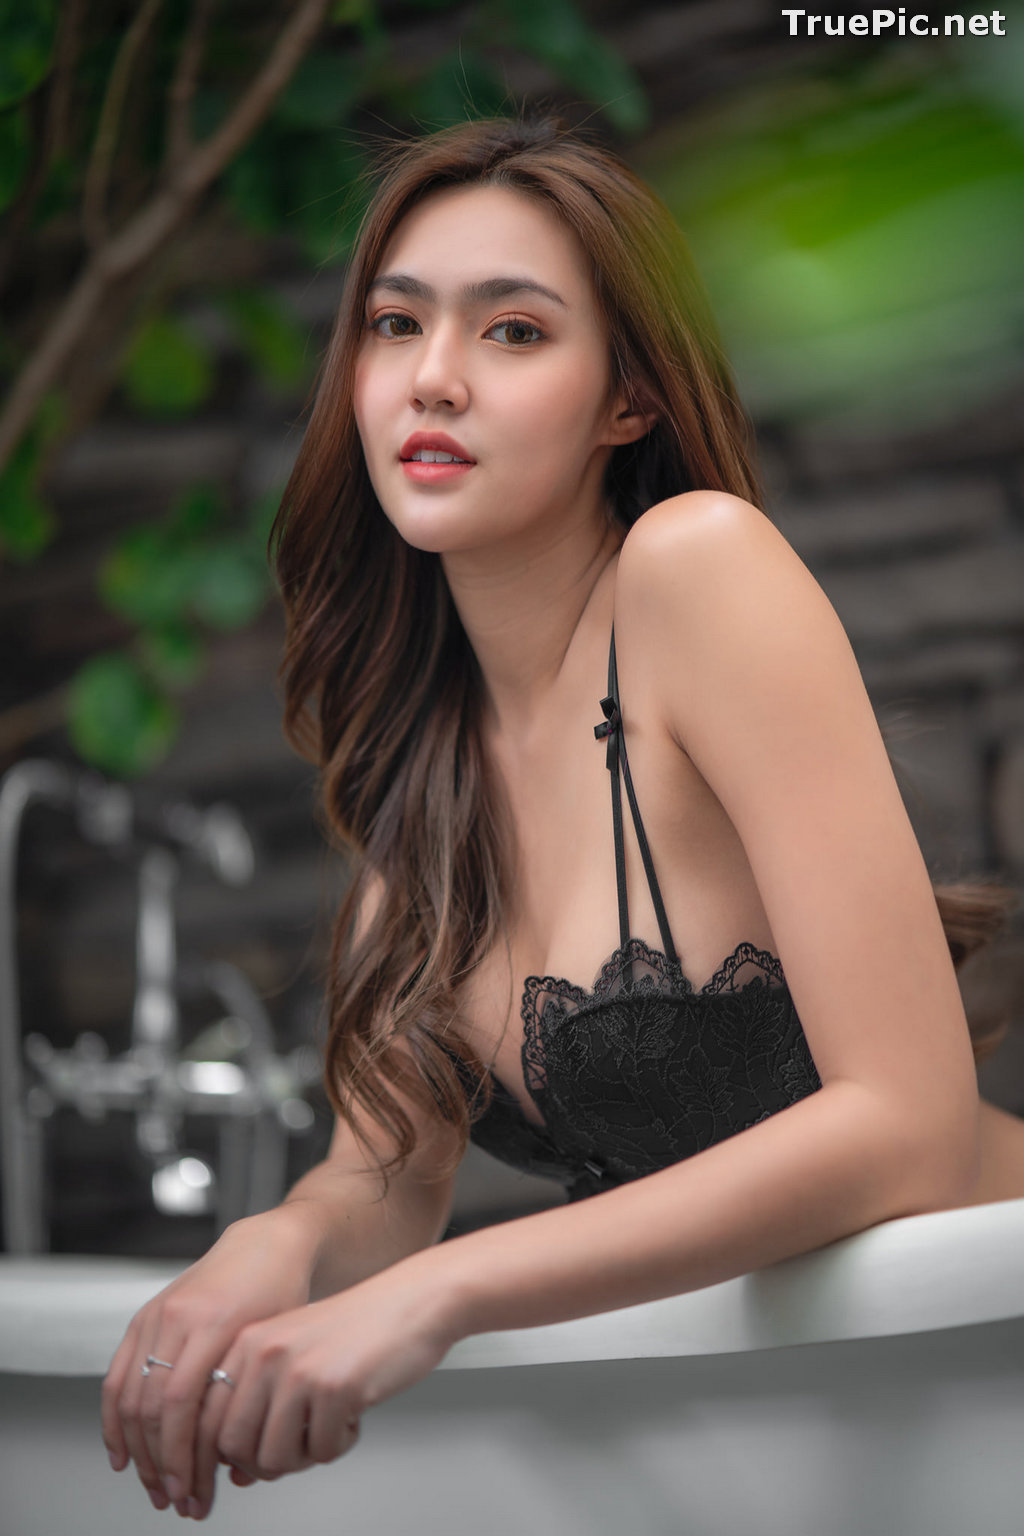 Image Thailand Model – Baifern Rinrucha – Beautiful Picture 2020 Collection - TruePic.net - Picture-59